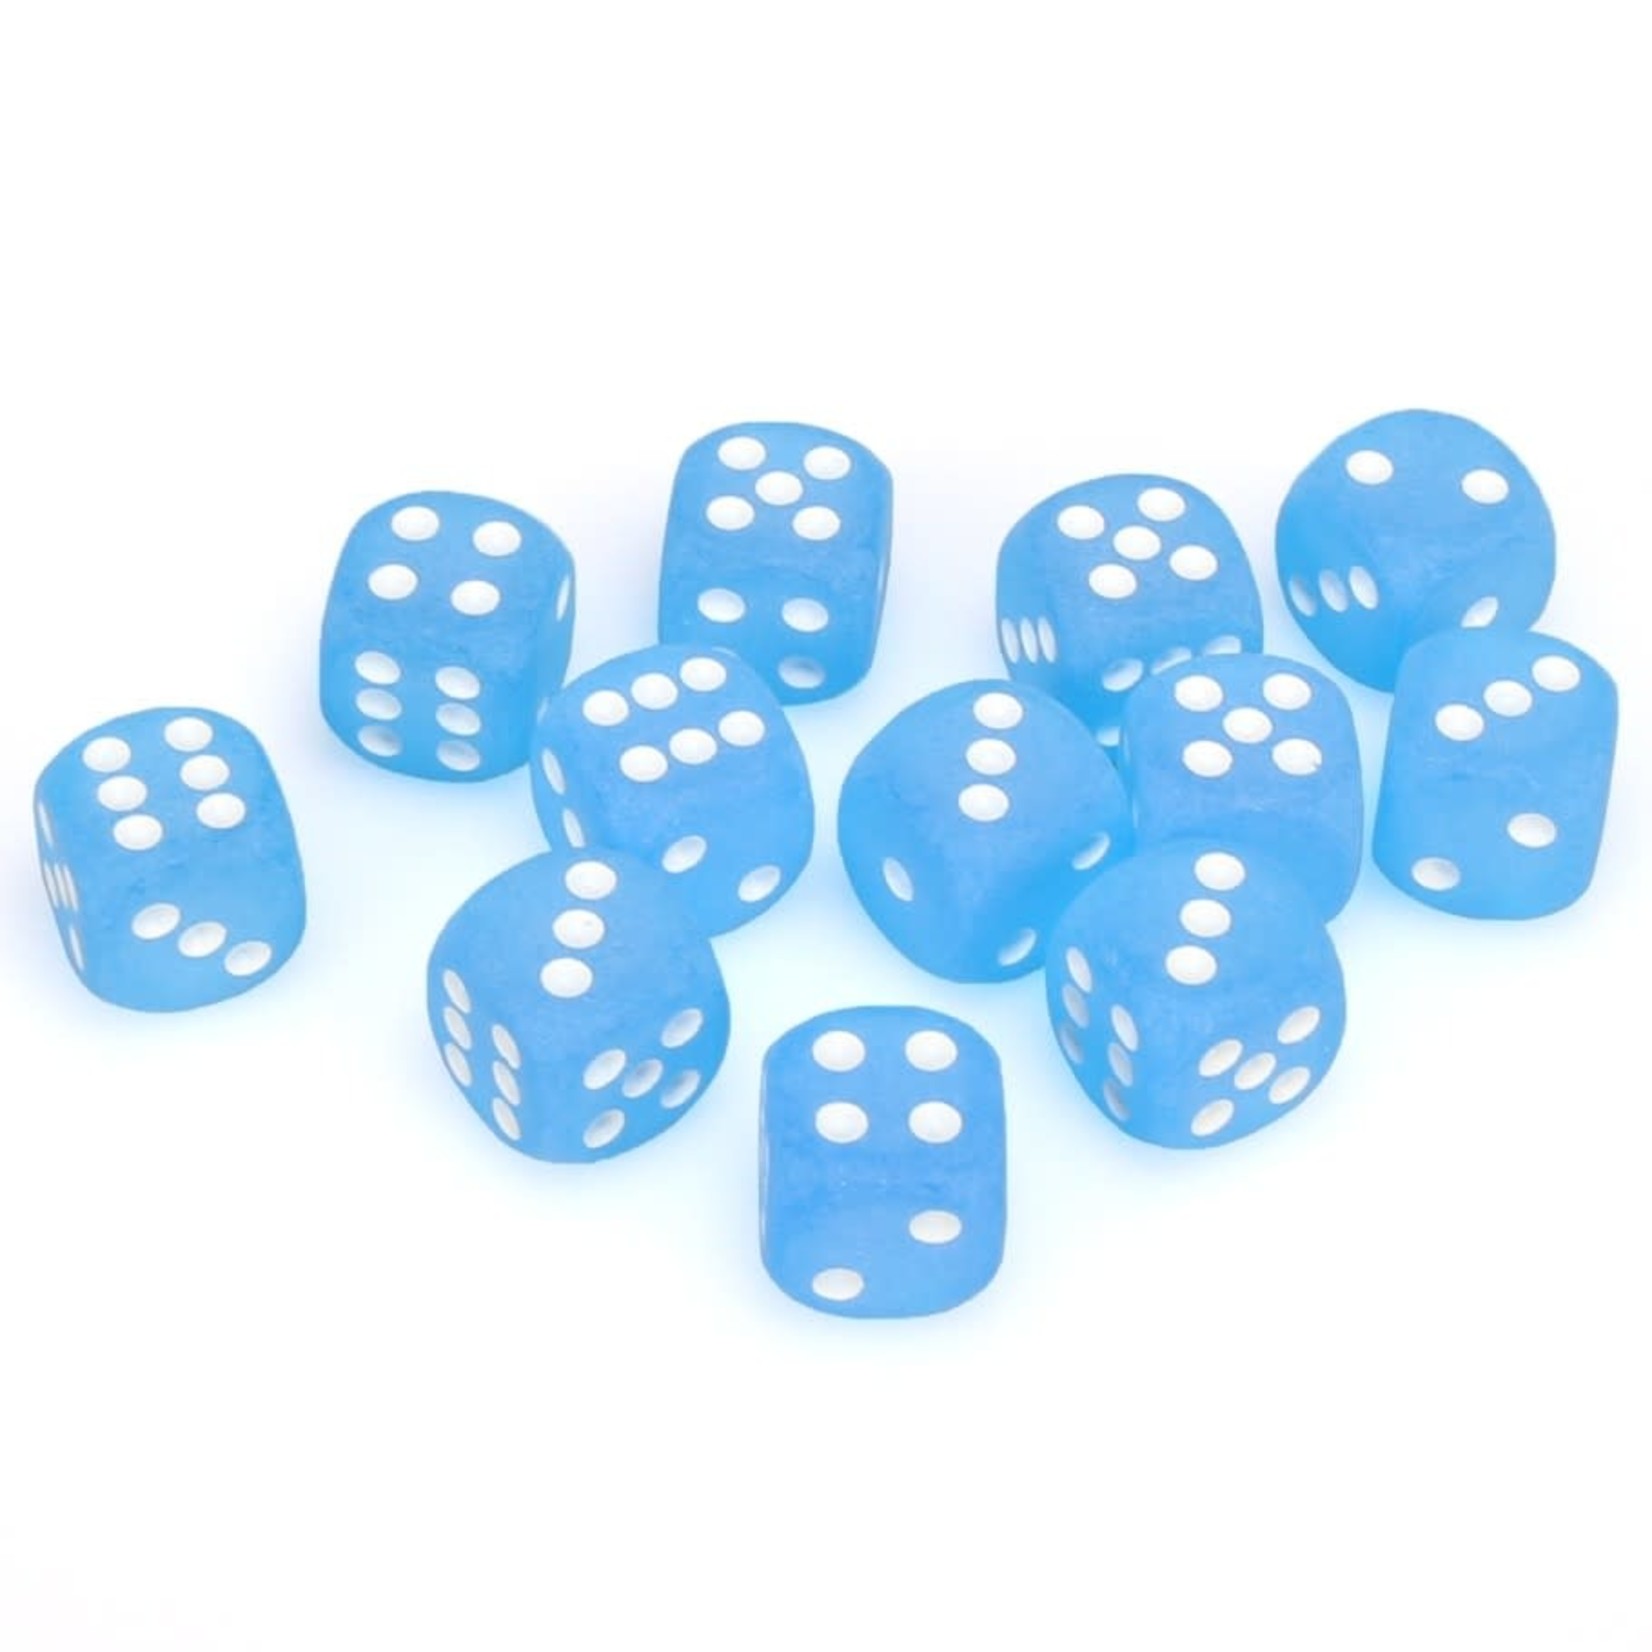 Chessex Chessex Frosted Caribbean Blue 16 mm d6 12 die set